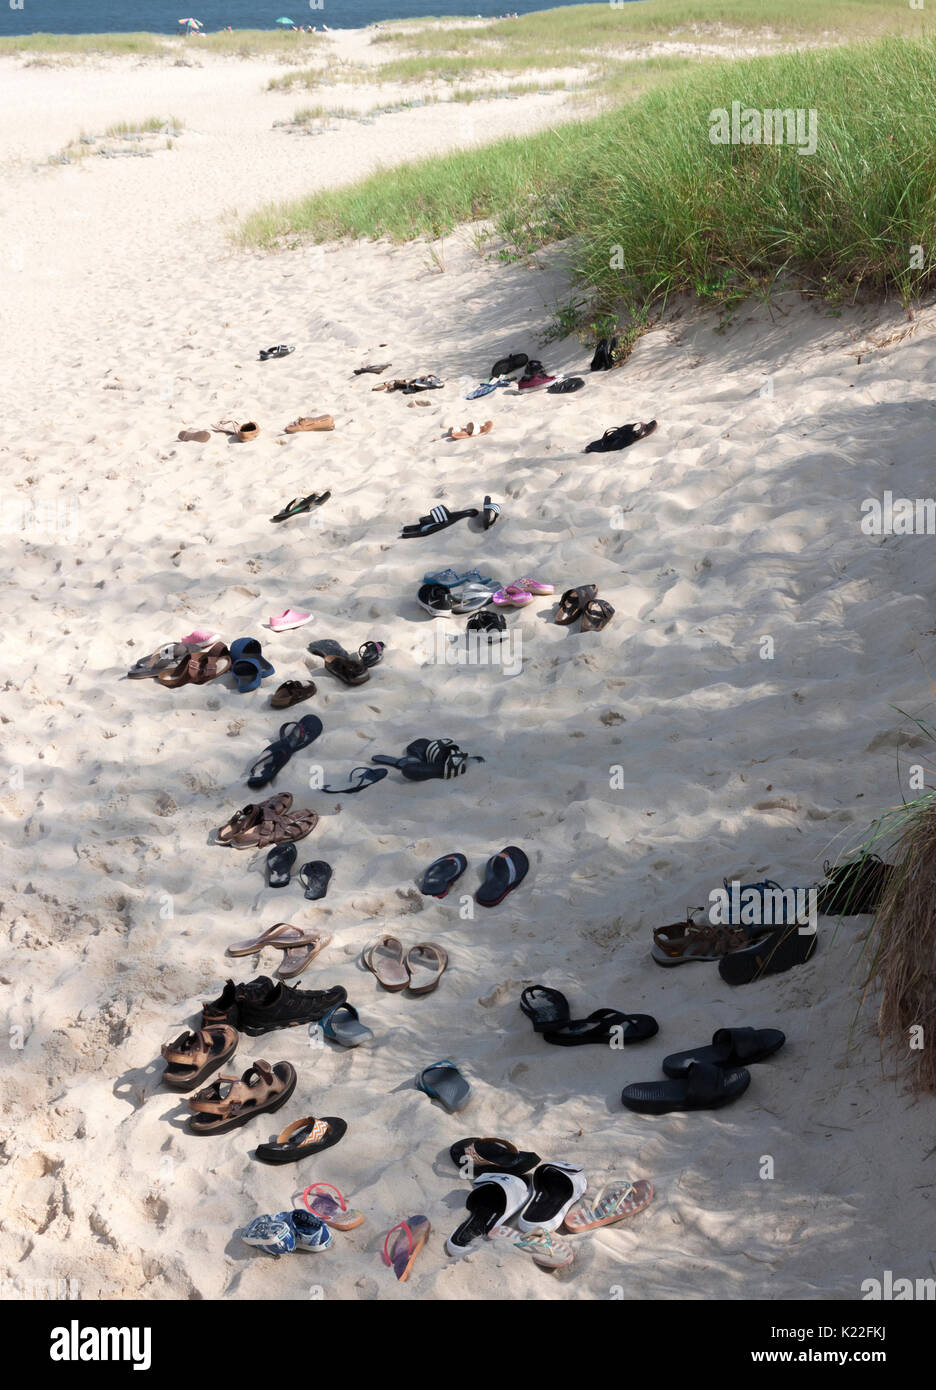 Sandals, flip flops & shoes left in the sand by barefoot beachgoers. Stock Photo